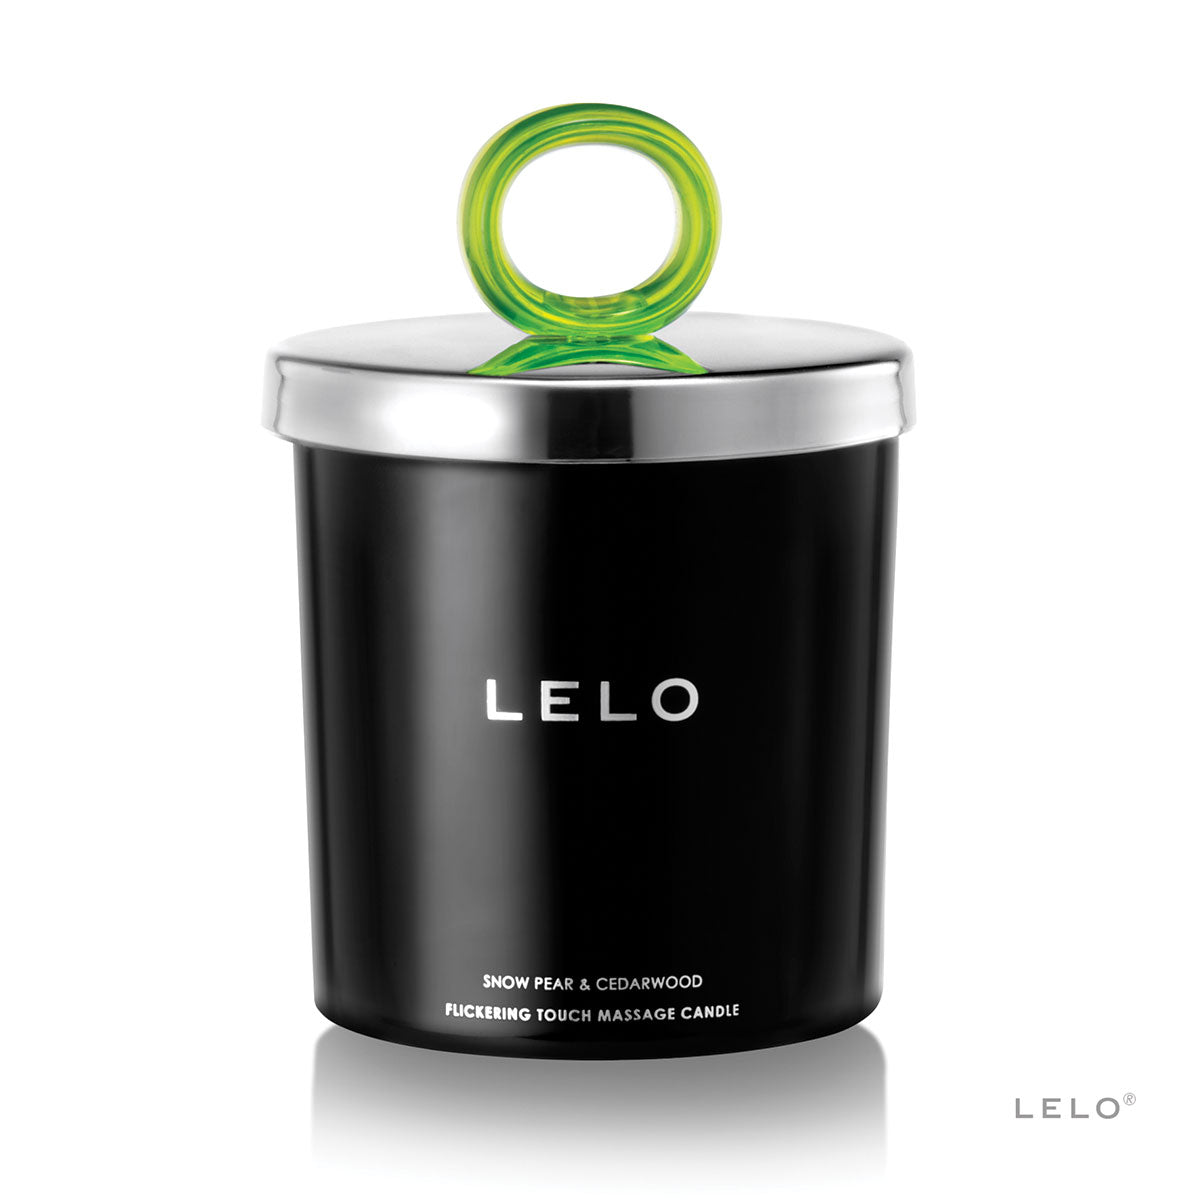 LELO Flickering Touch Massage Candle - Assorted Scents